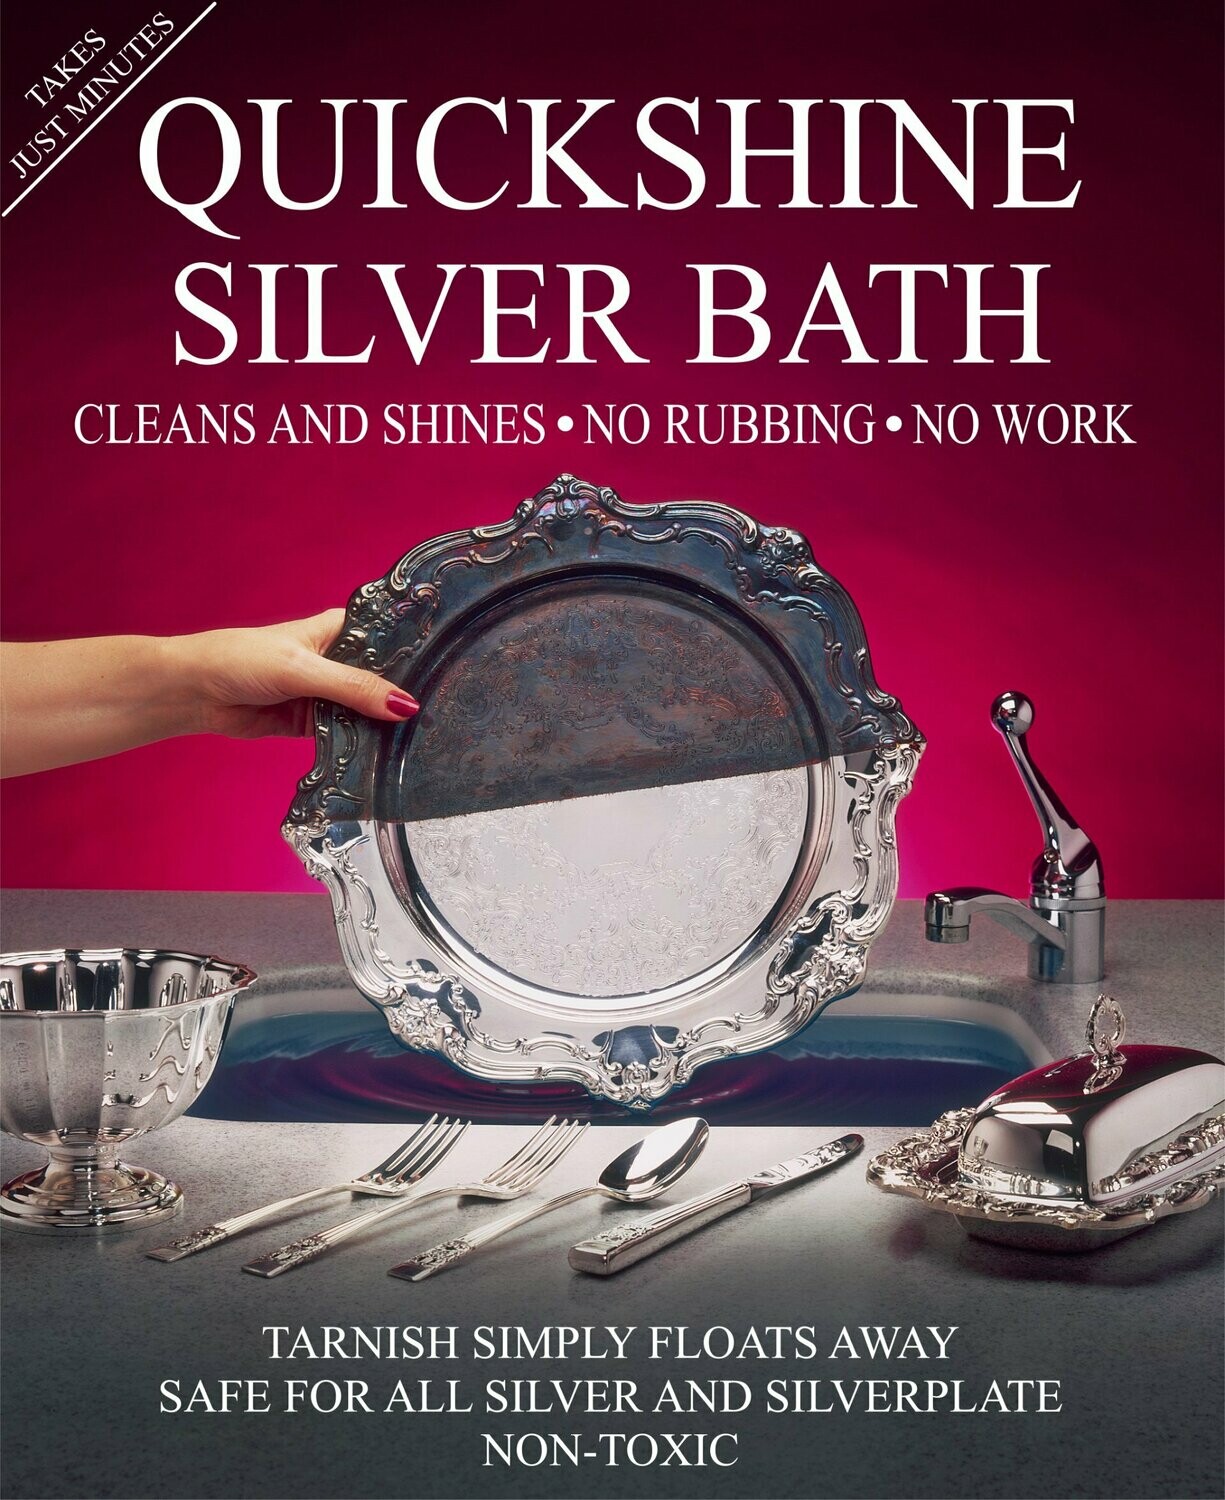 Caraselle Pack of 4 Sachets of Quickshine Silver Bath 4 x 50g